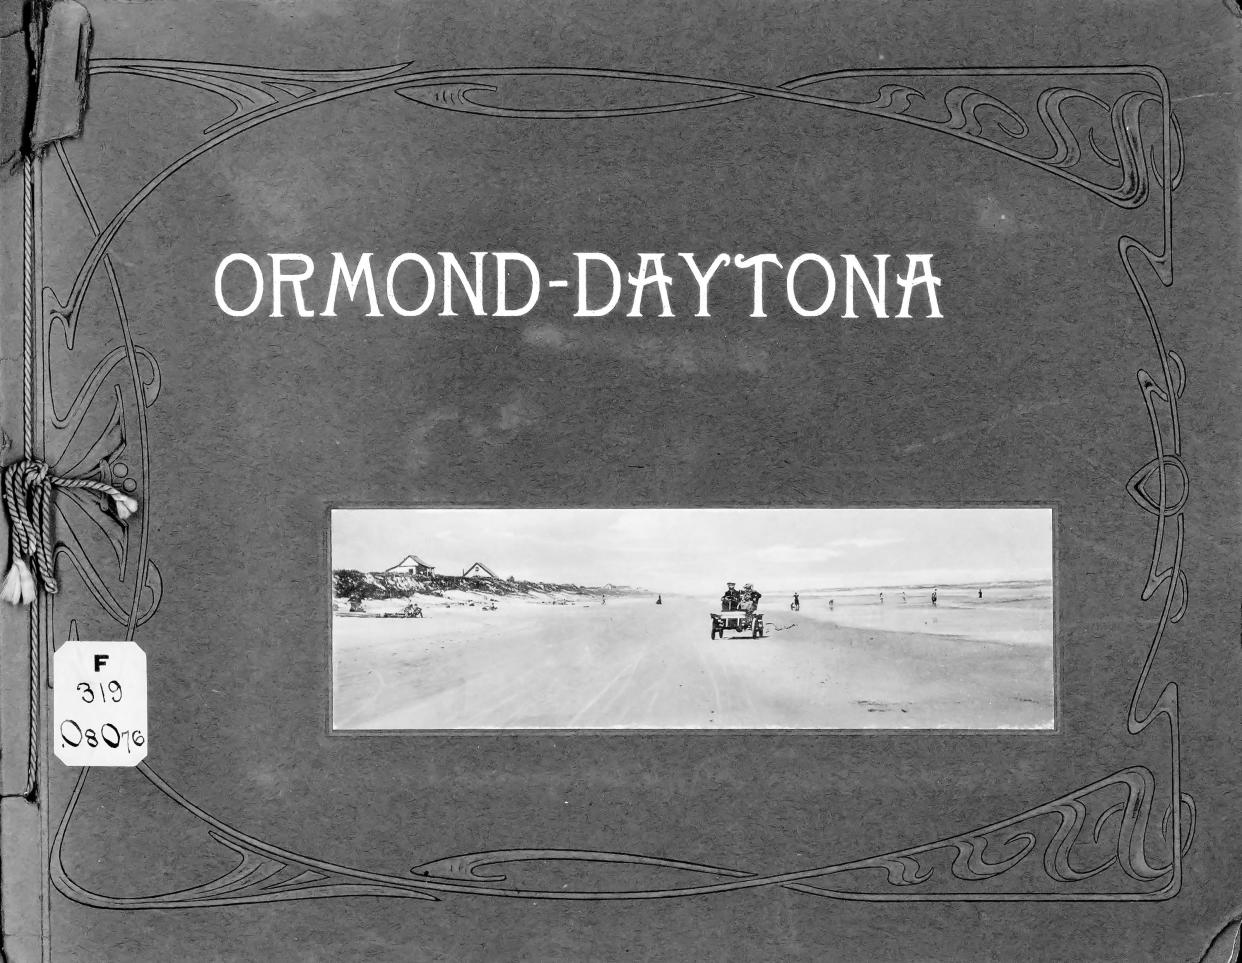 Cover of A Ormond-Daytona postcard album published by the Rotograph Co. of New York City, 1904.